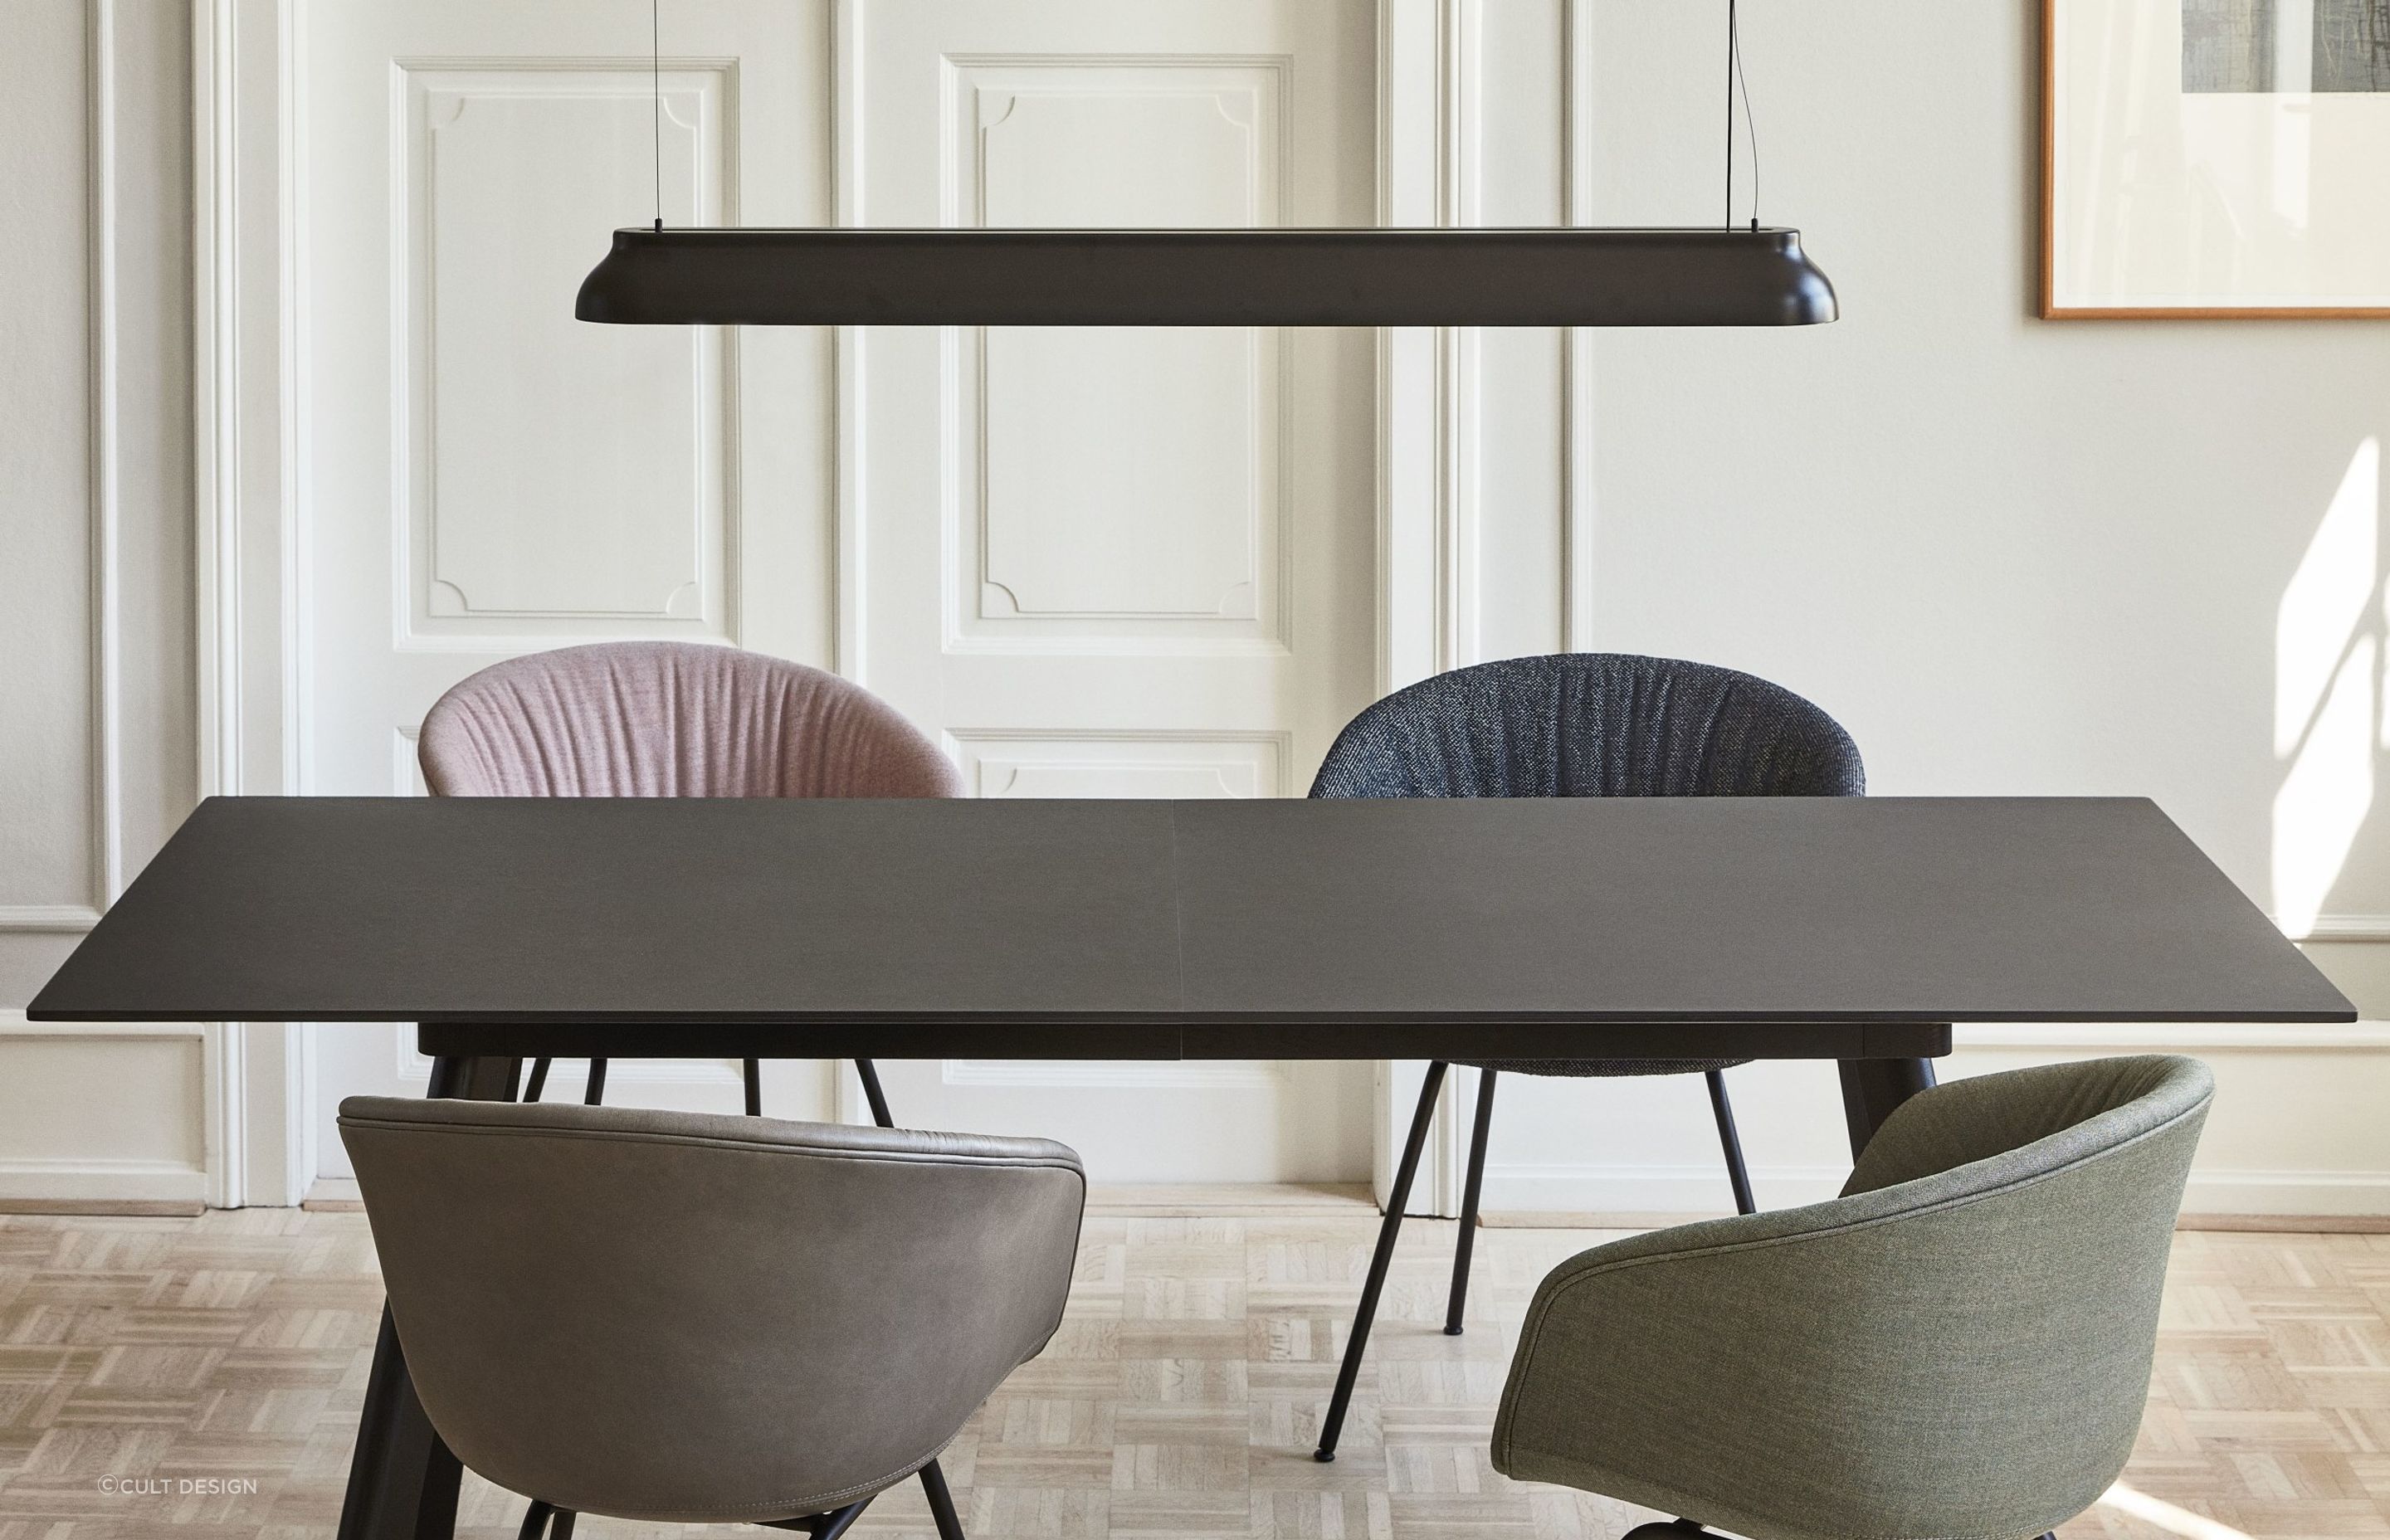 This PC Linear Light by Hay shows how sleek dining room lights can be.